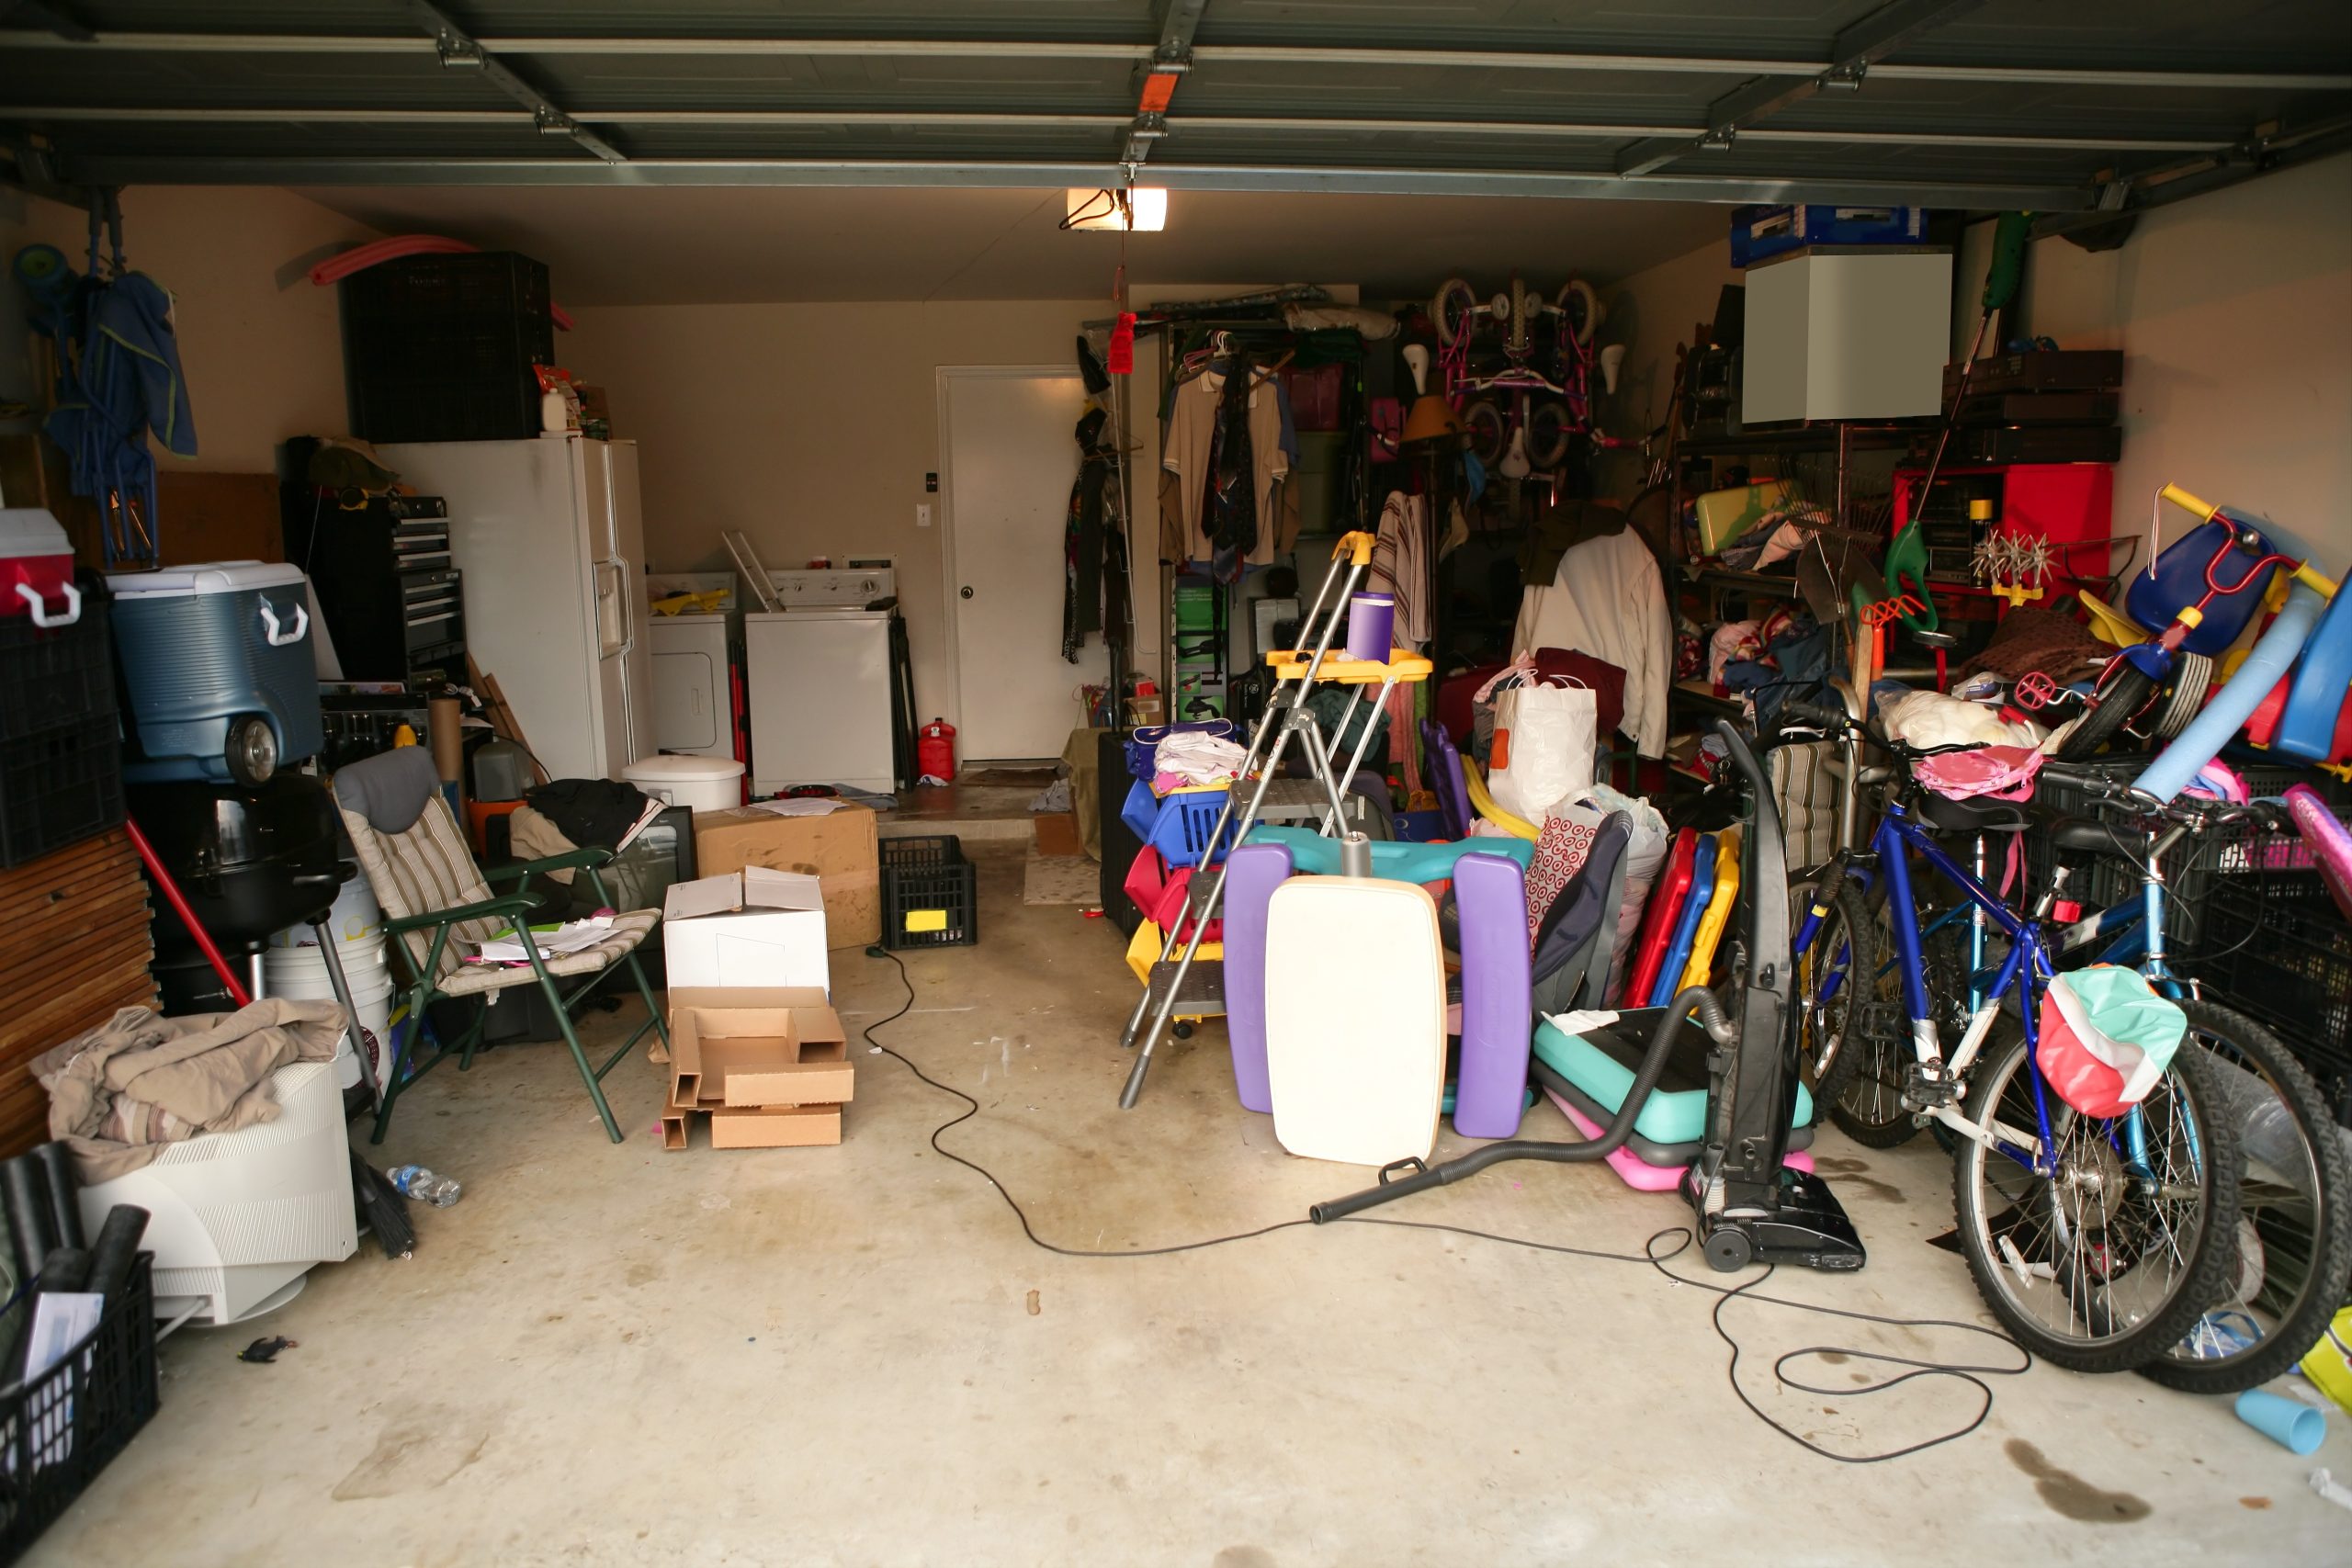 Messy garage, boxes on floor, overpacked and very unorganized